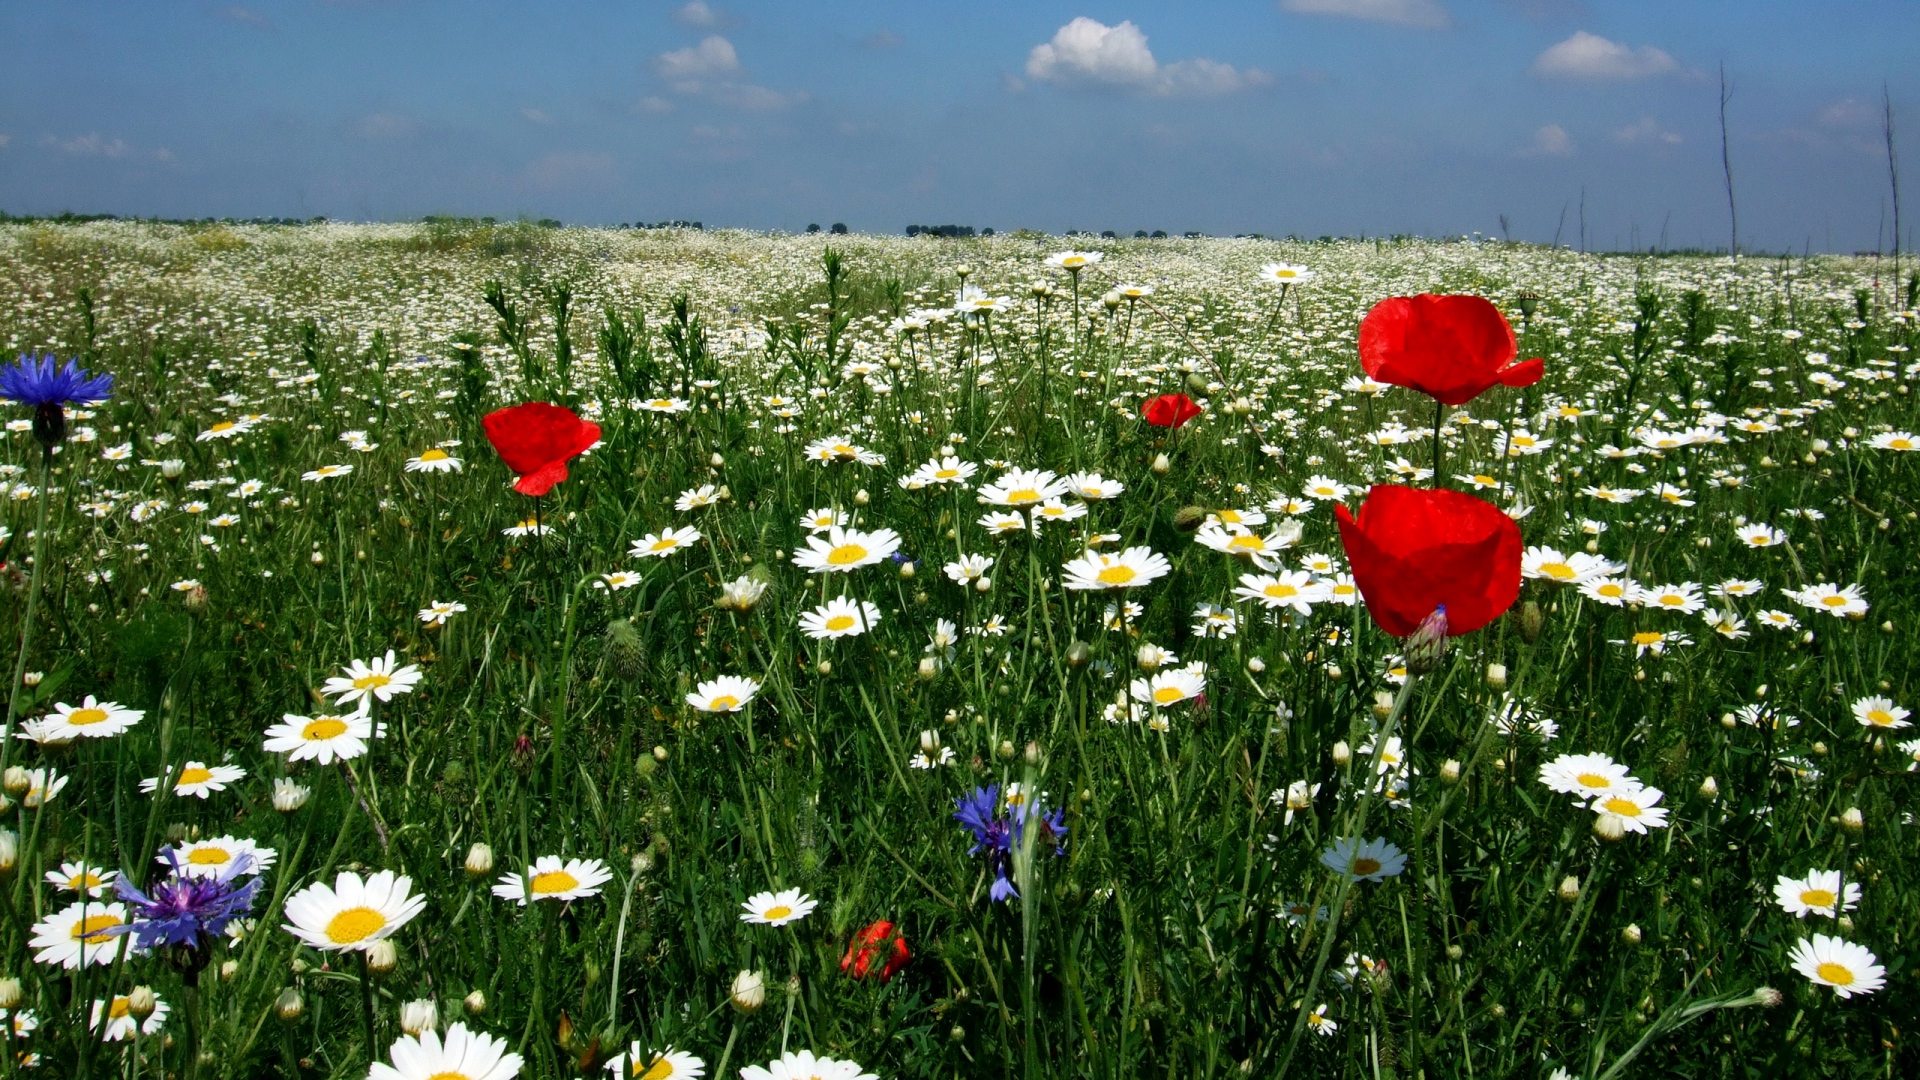 Download Wallpaper 1920x1080 Daisies, Poppies, Field, Flowers ...